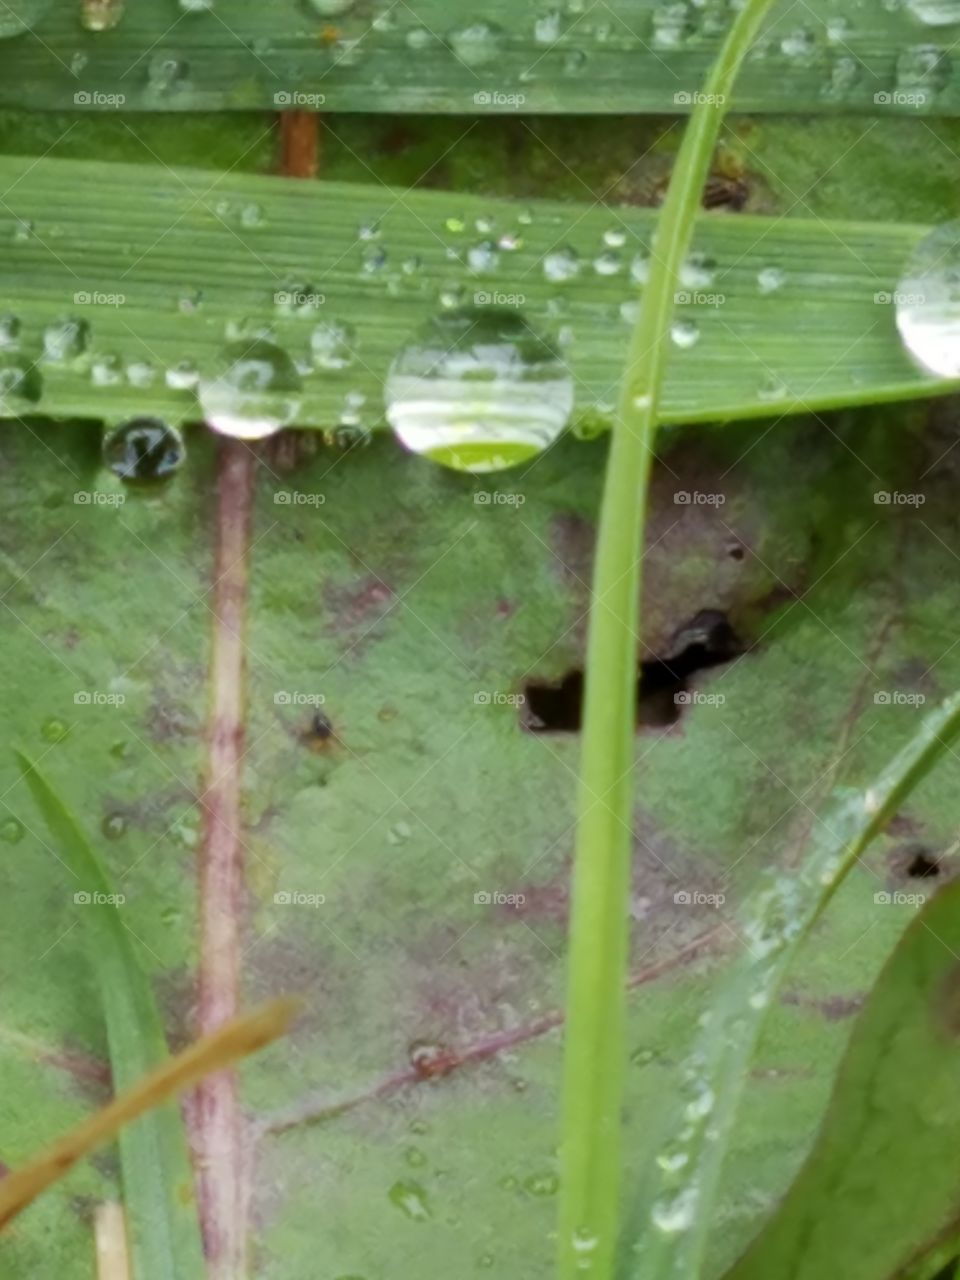 blades of grass and drops of water